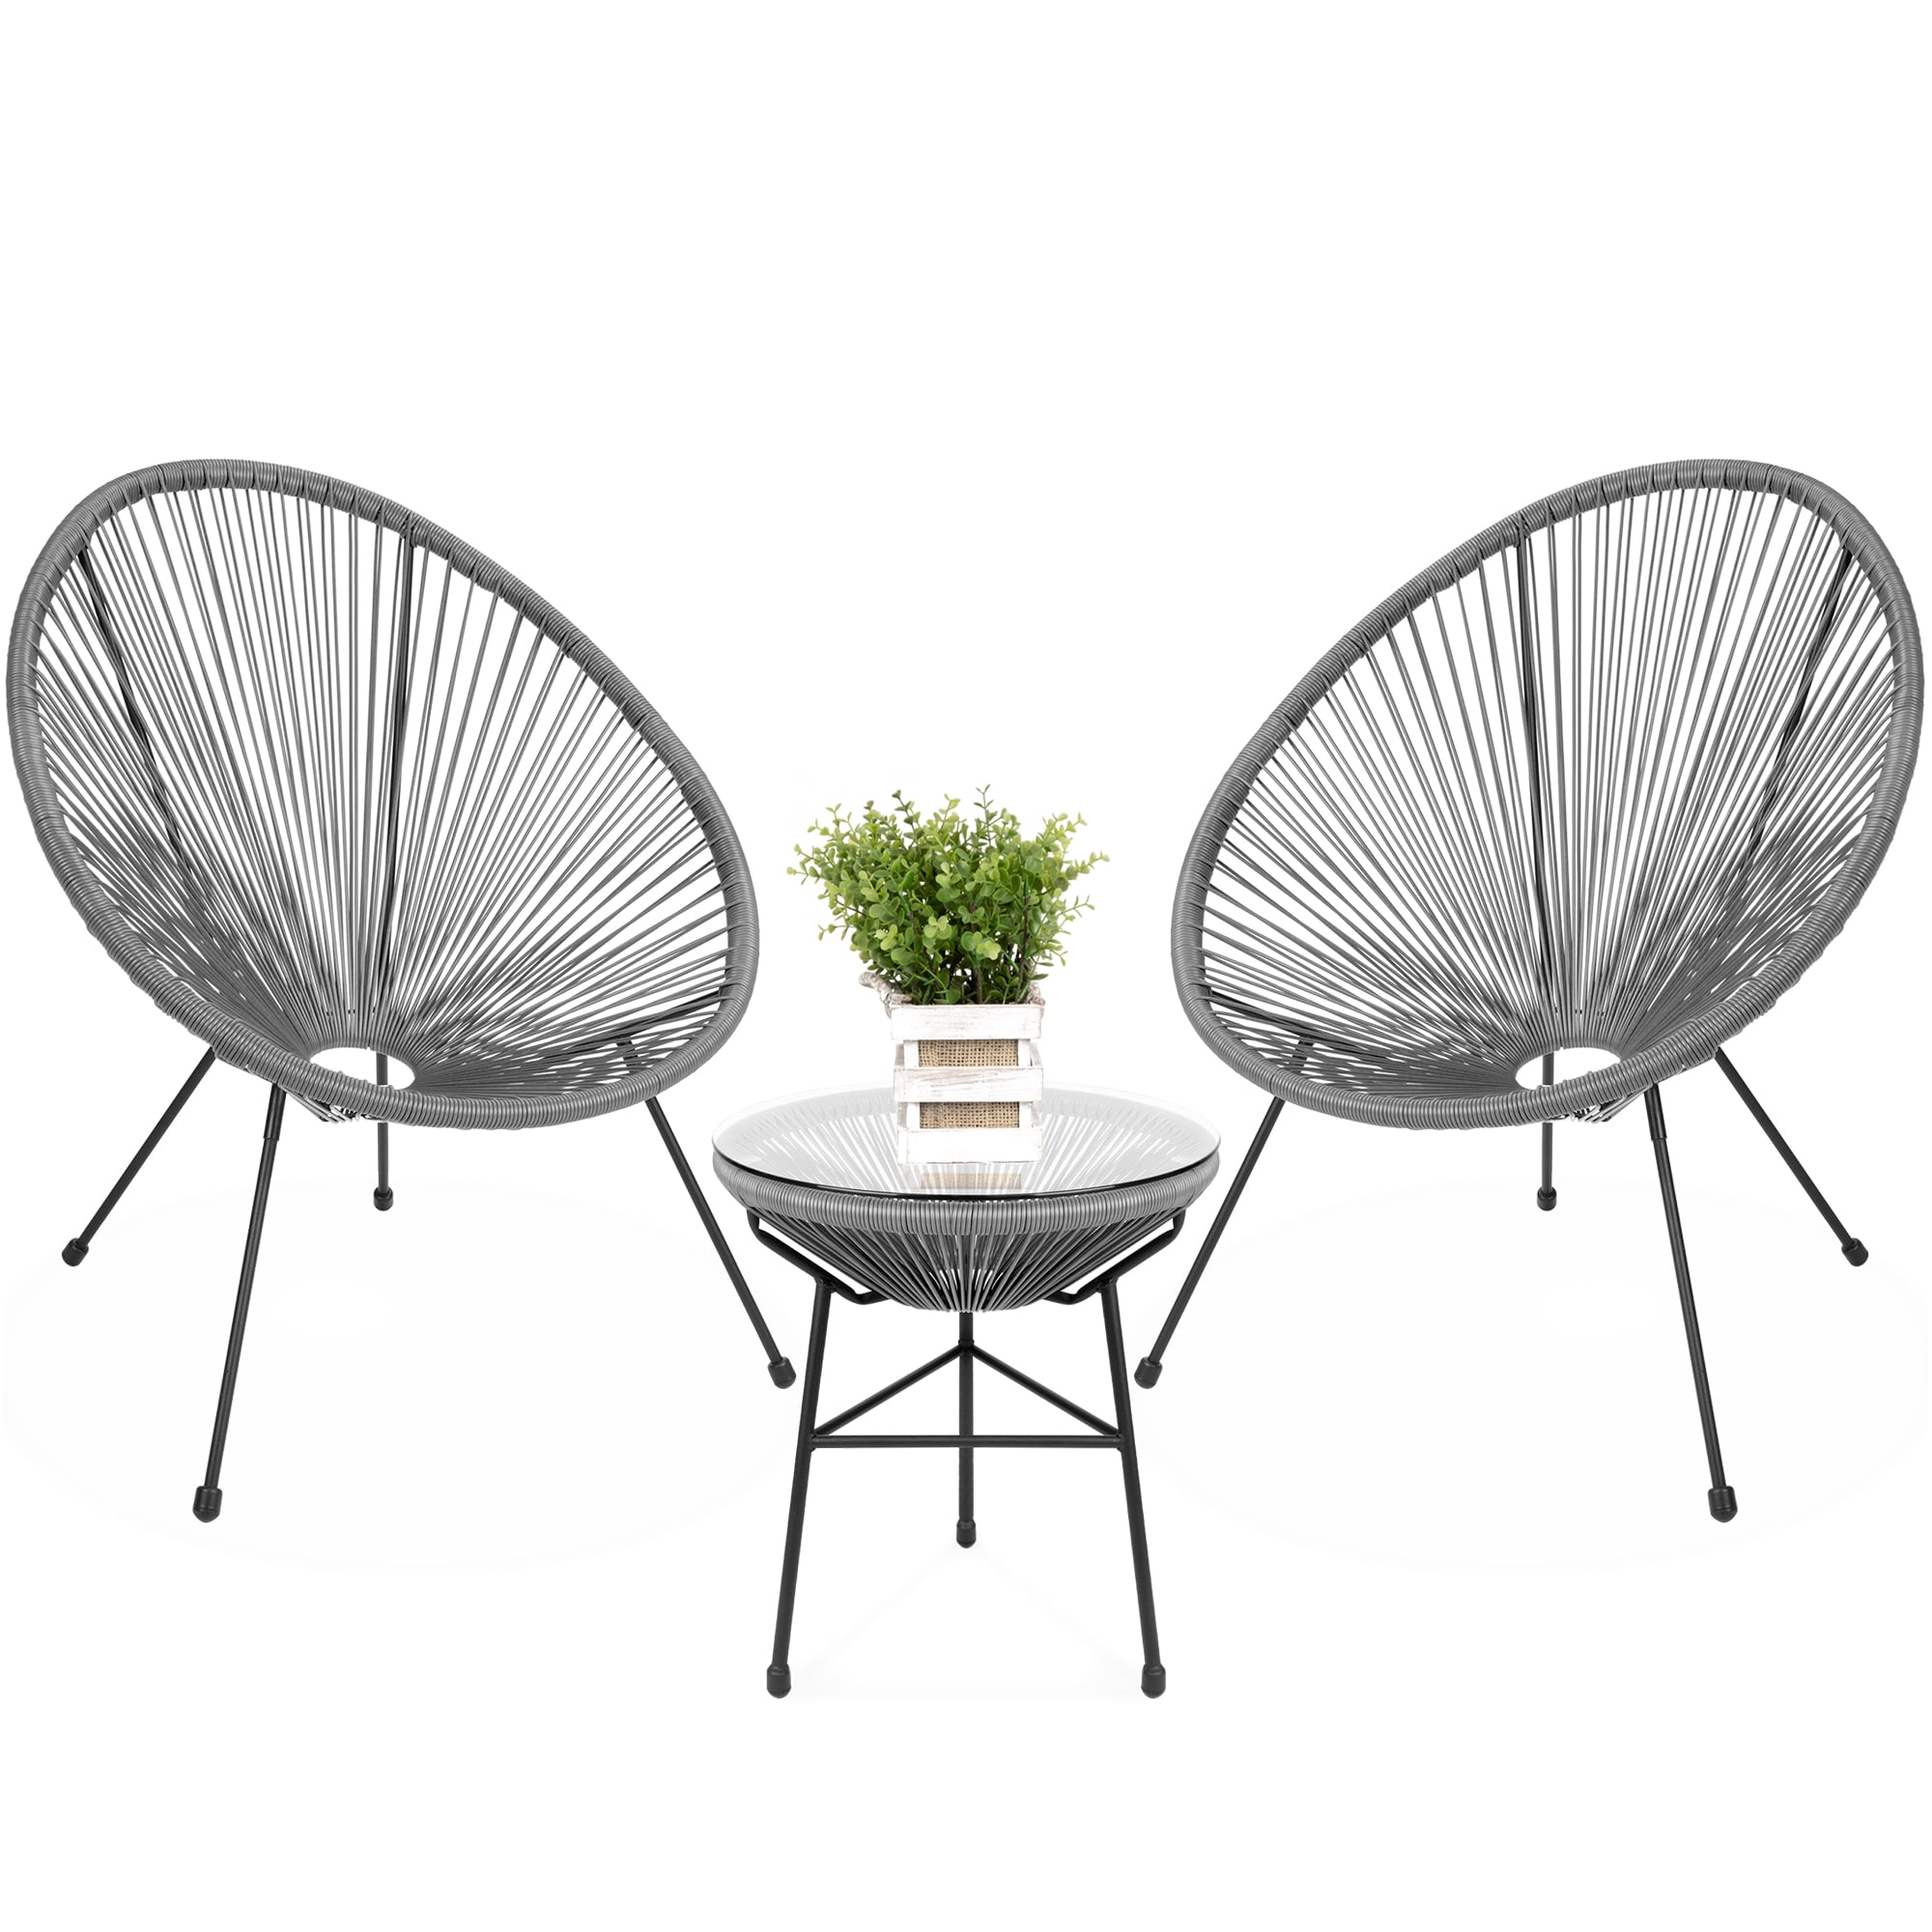 Best Choice Products 3-Piece All-Weather Patio Woven Rope Acapulco Bistro Furniture Set w/Rocking Chairs Gray Table 